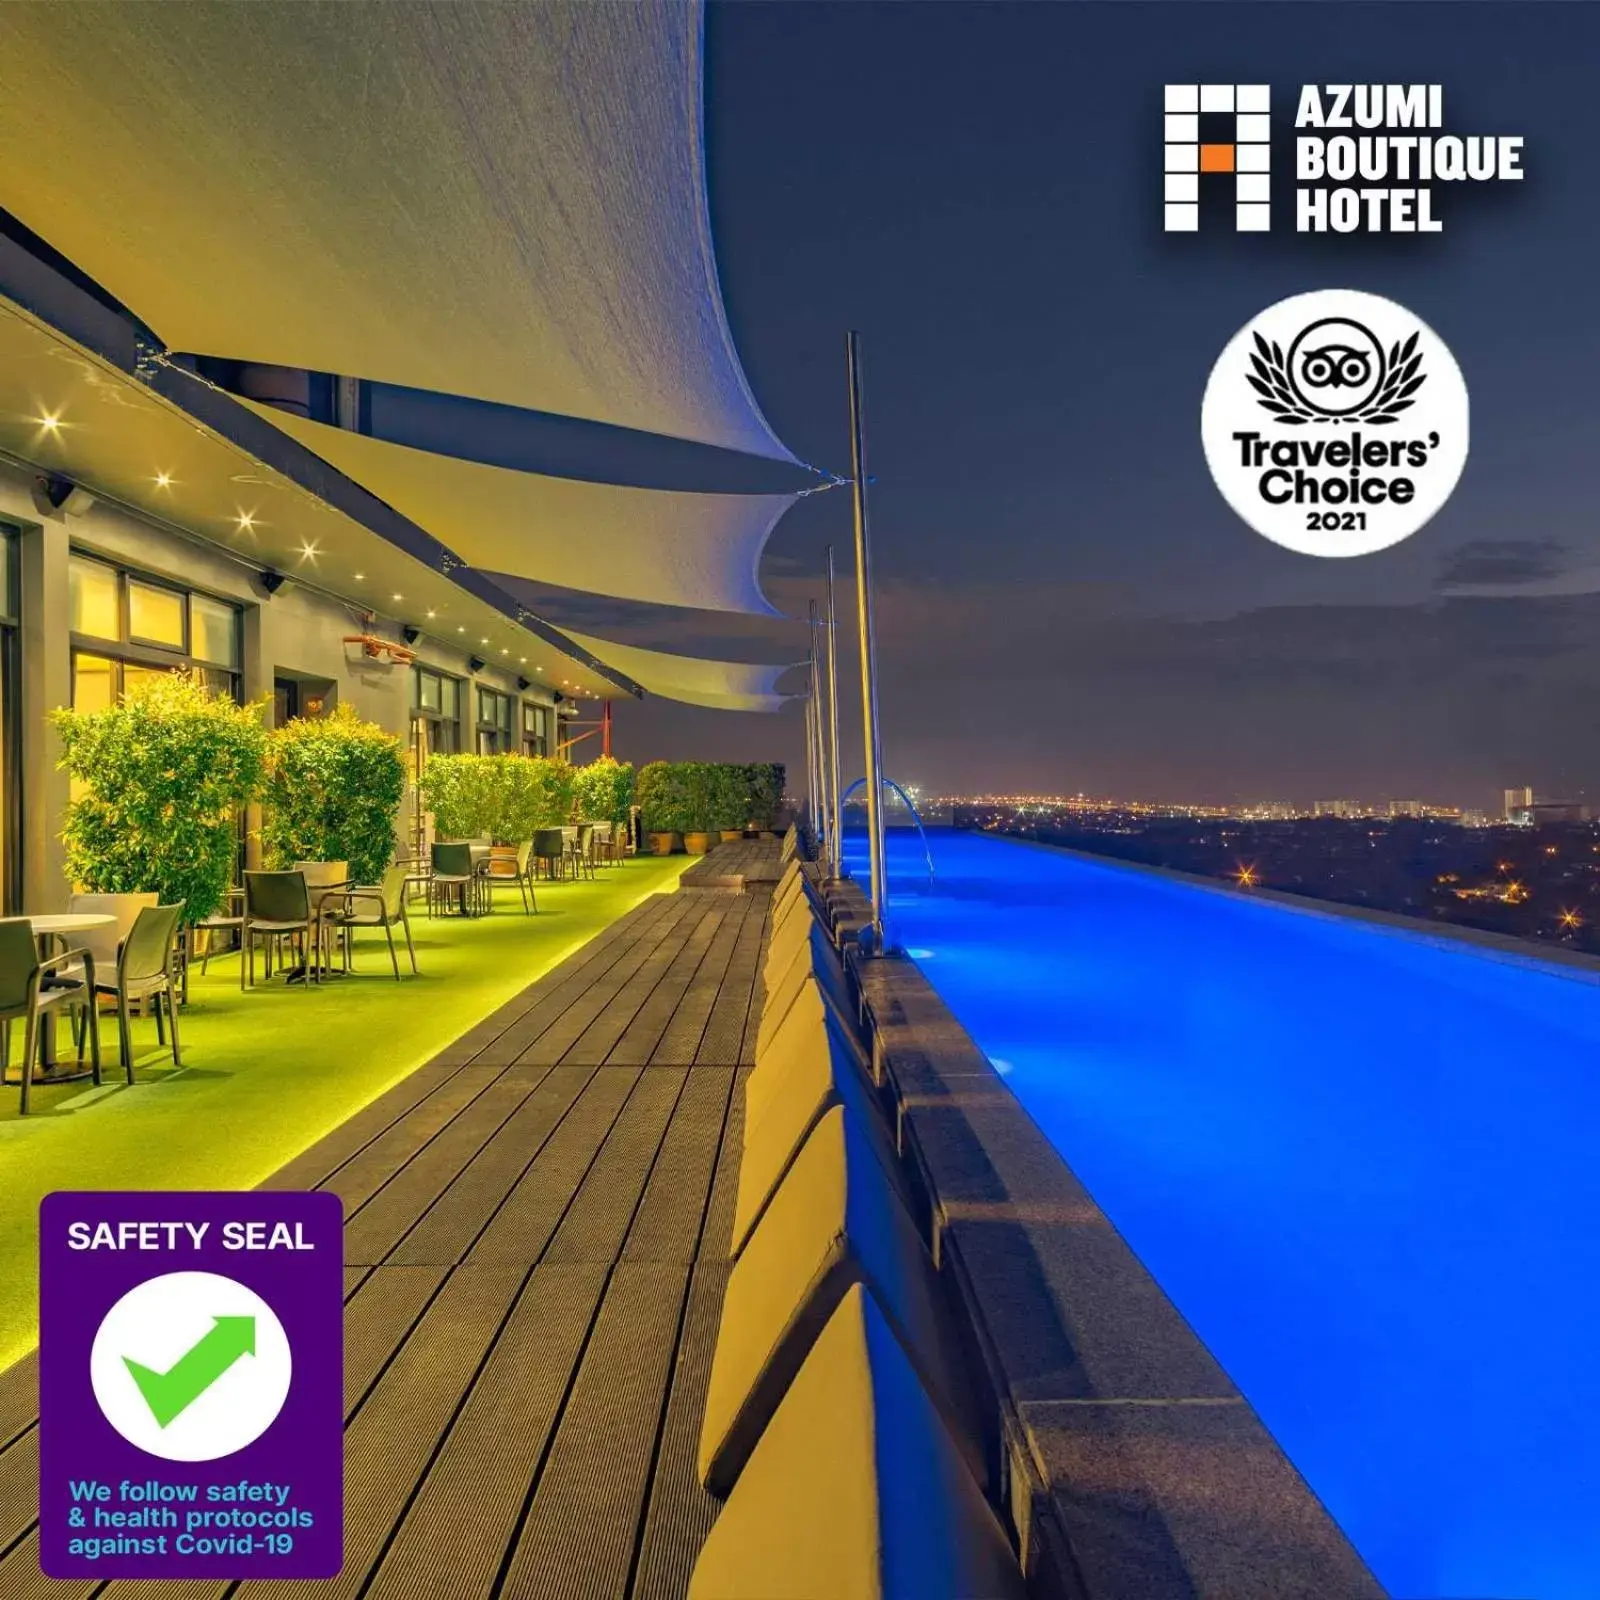 Certificate/Award in Azumi Boutique Hotel, Multiple Use Hotel Staycation Approved